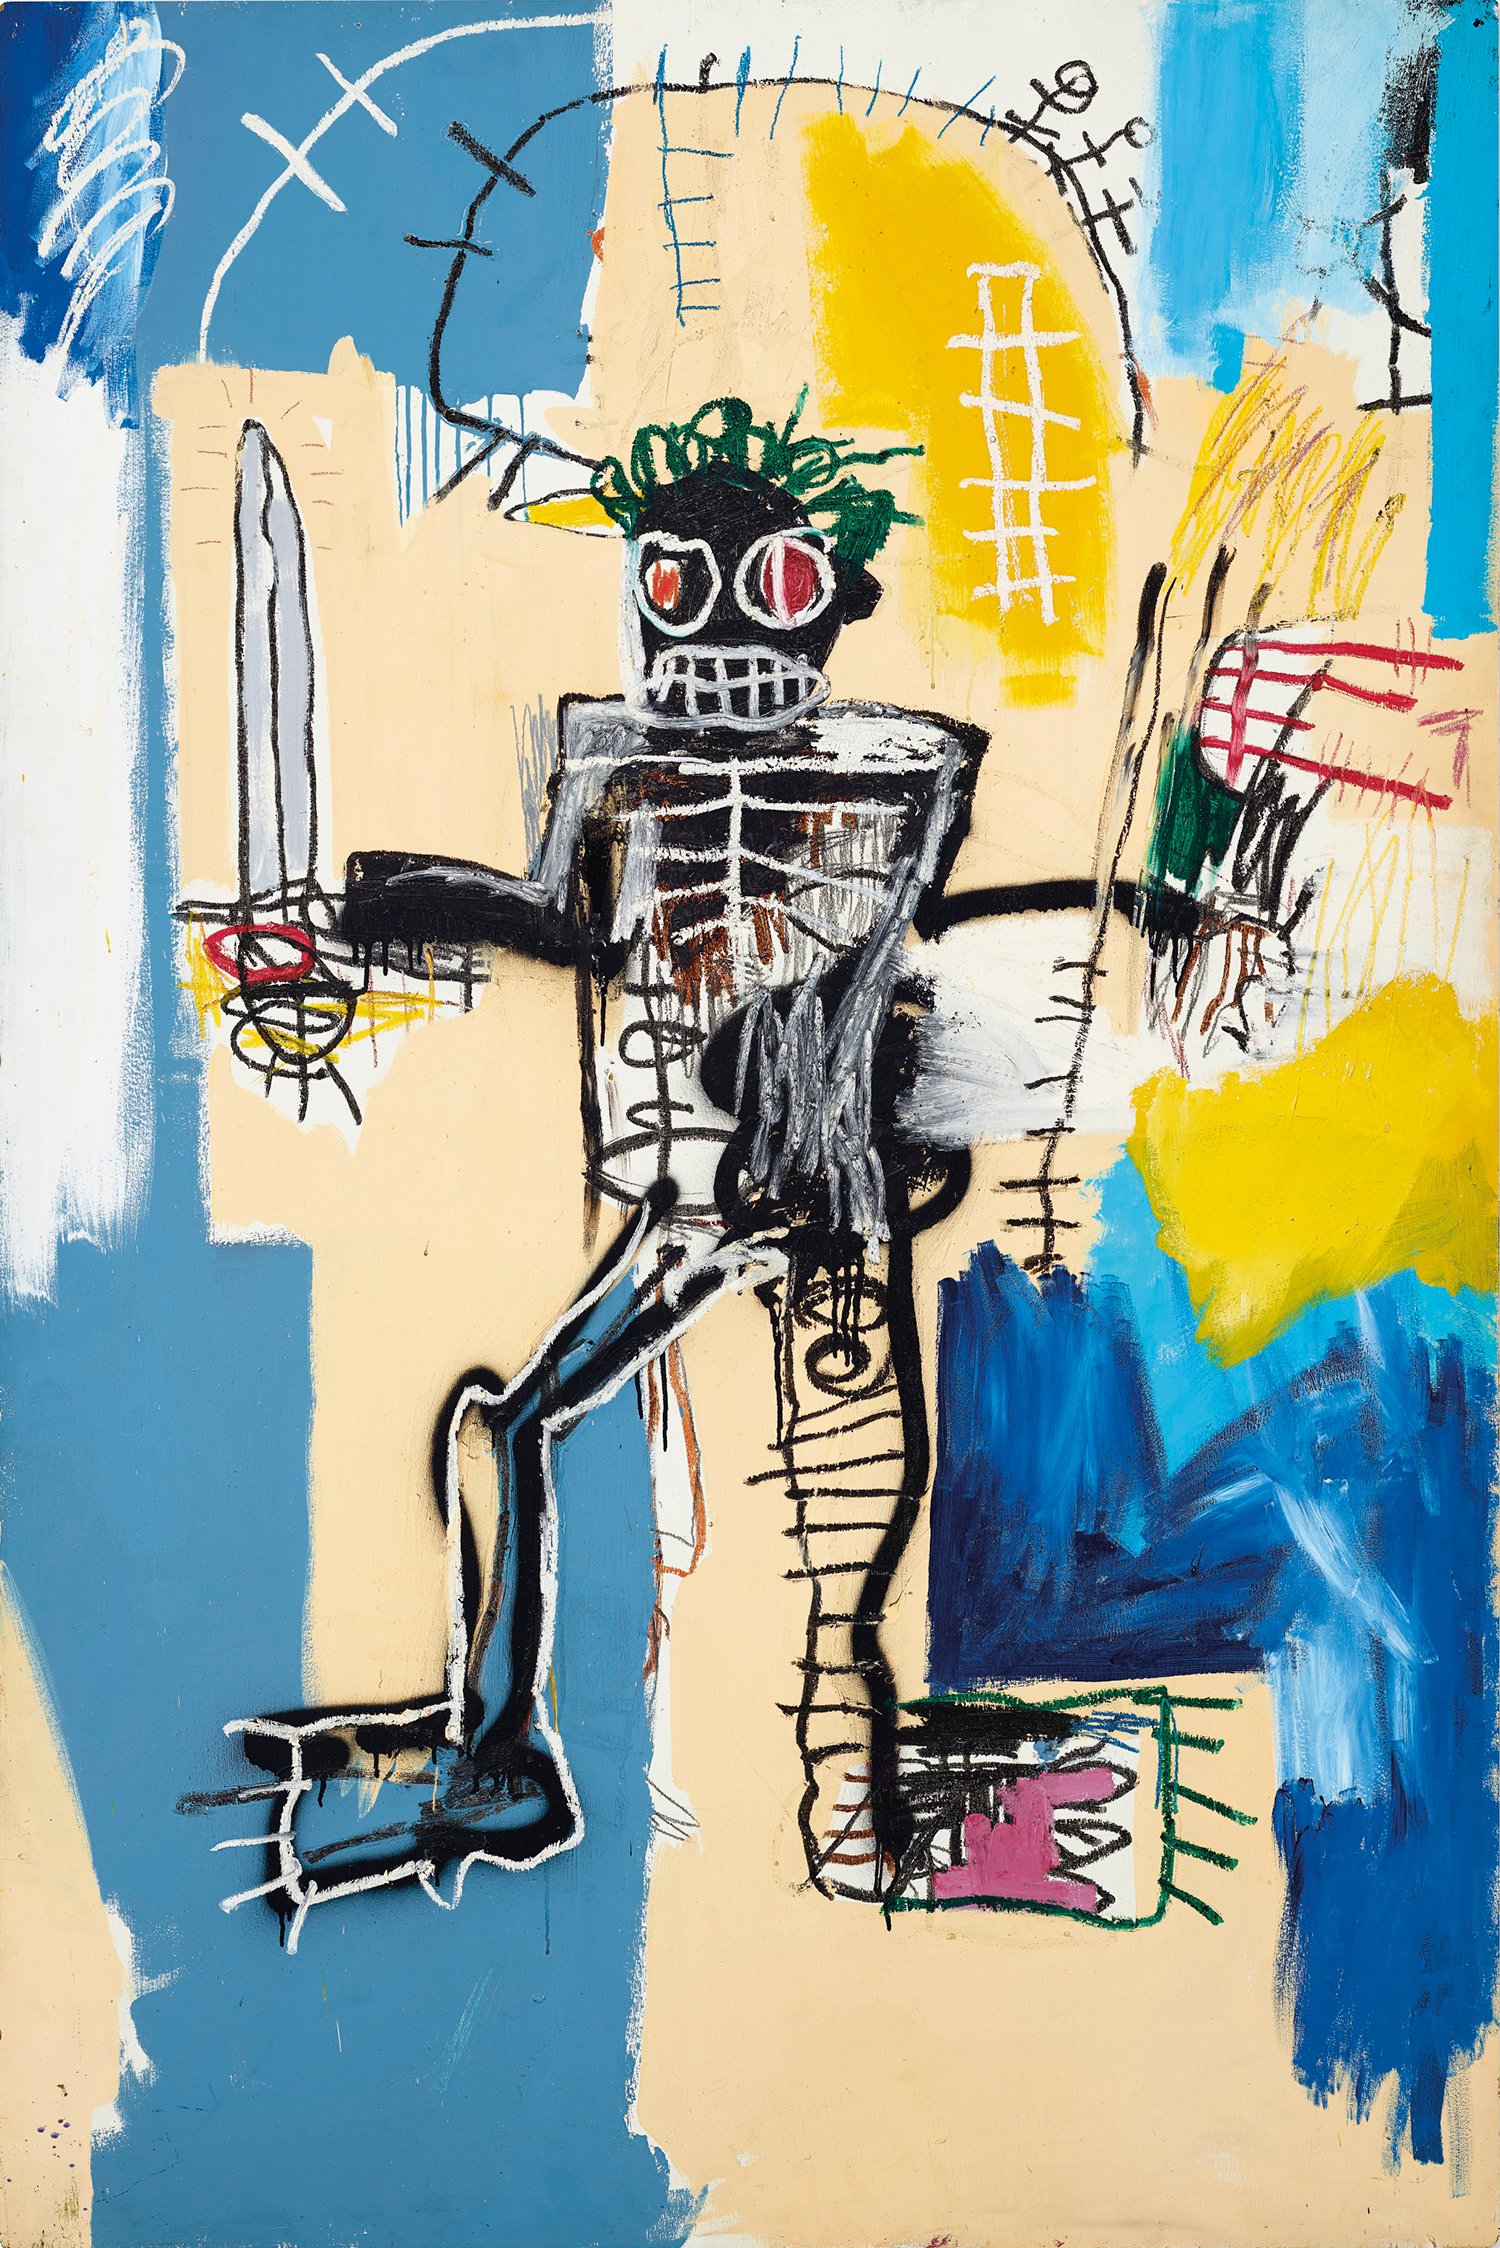 A vibrant, mixed-media painting by Jean-Michel Basquiat named “Warrior”. The painting features a bold, abstract figure of a gladiator, outlined in spray paint and filled in with textured layers of acrylic. The figure is set against a vivid, abstract background with spontaneous patches of blue and yellow. The gladiator, brandishing a sword, embodies an intense, raw energy that infuses the entire painting.